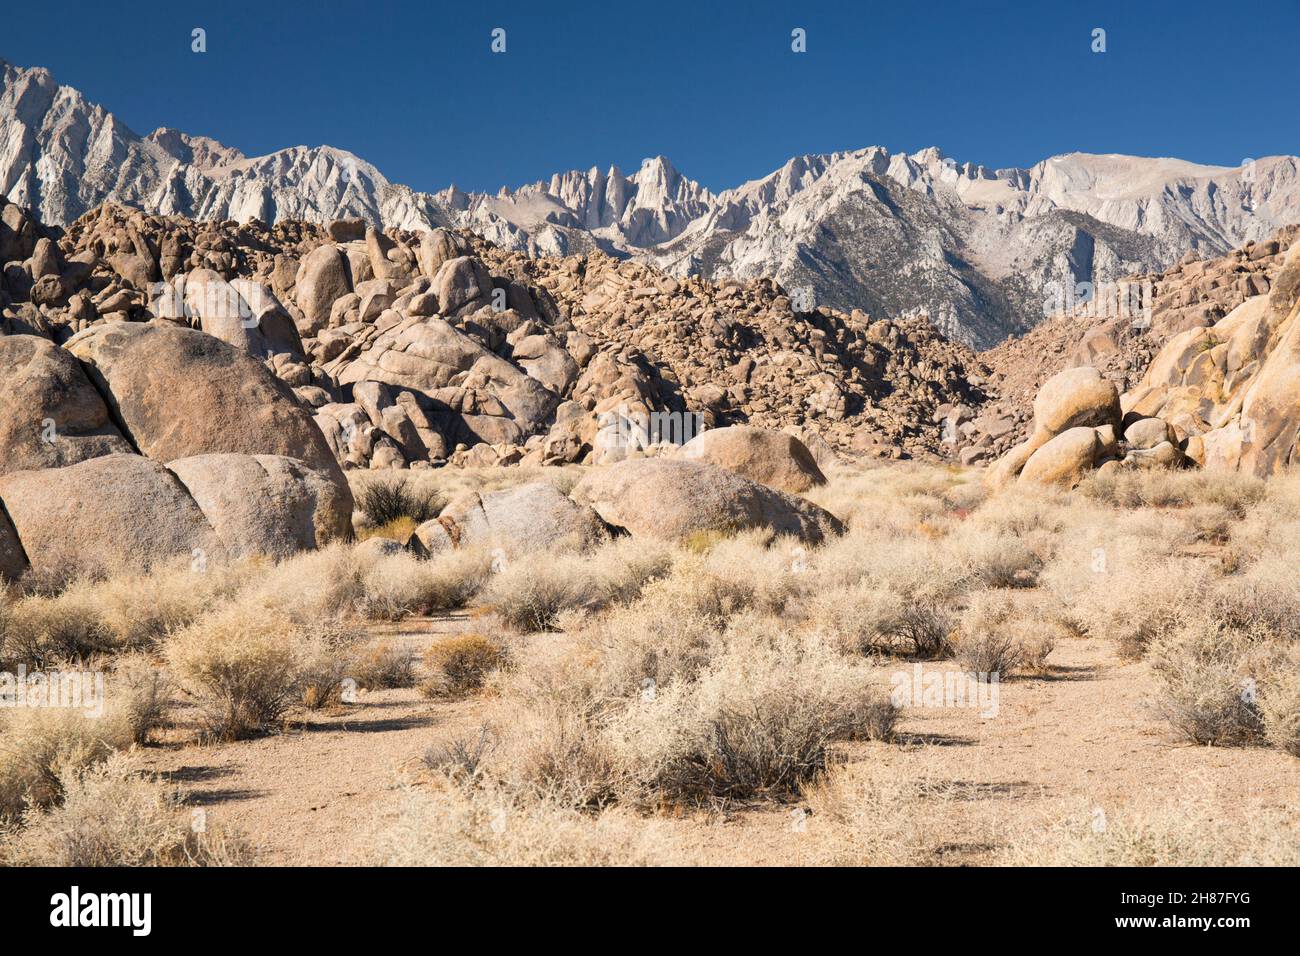 Alabama Hills National Scenic Area, Lone Pine, California, USA. View across rocky desert landscape to Mount Whitney and the Sierra Nevada. Stock Photo